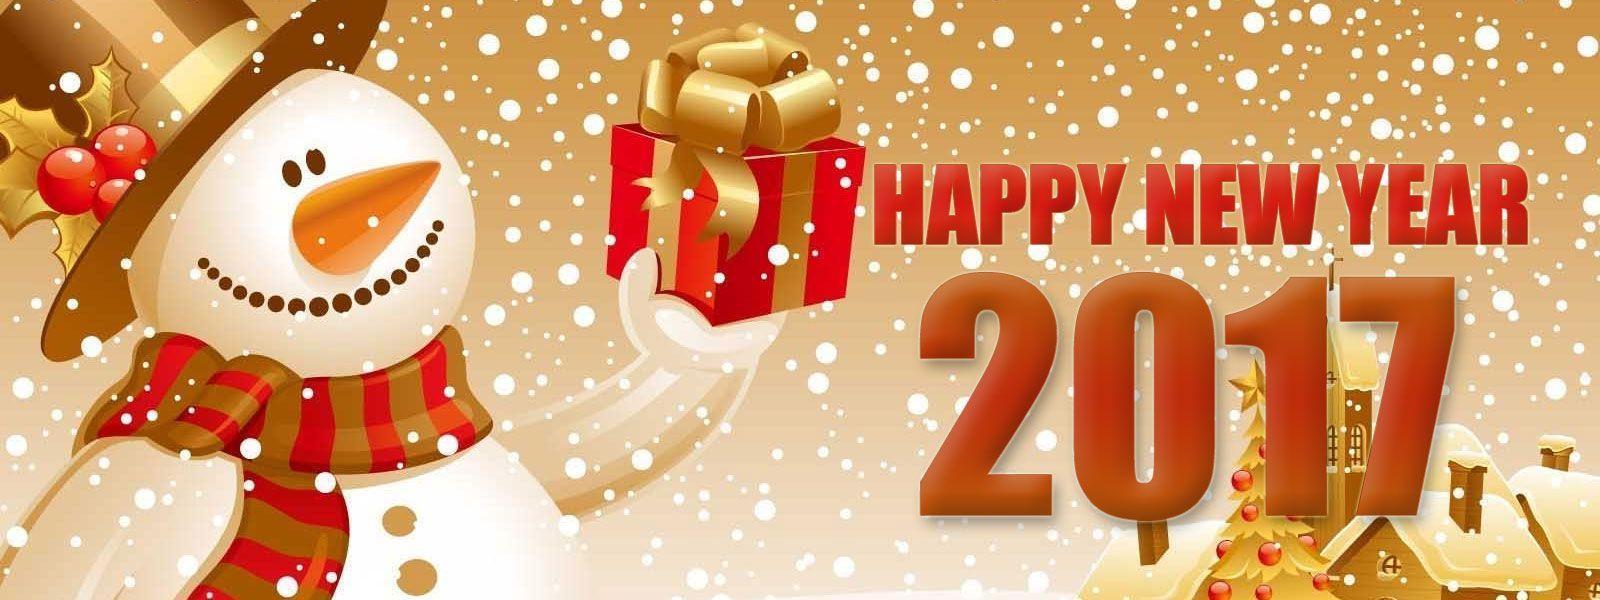 Happy New Year Wallpaper and Image 2017 Free Downlaod